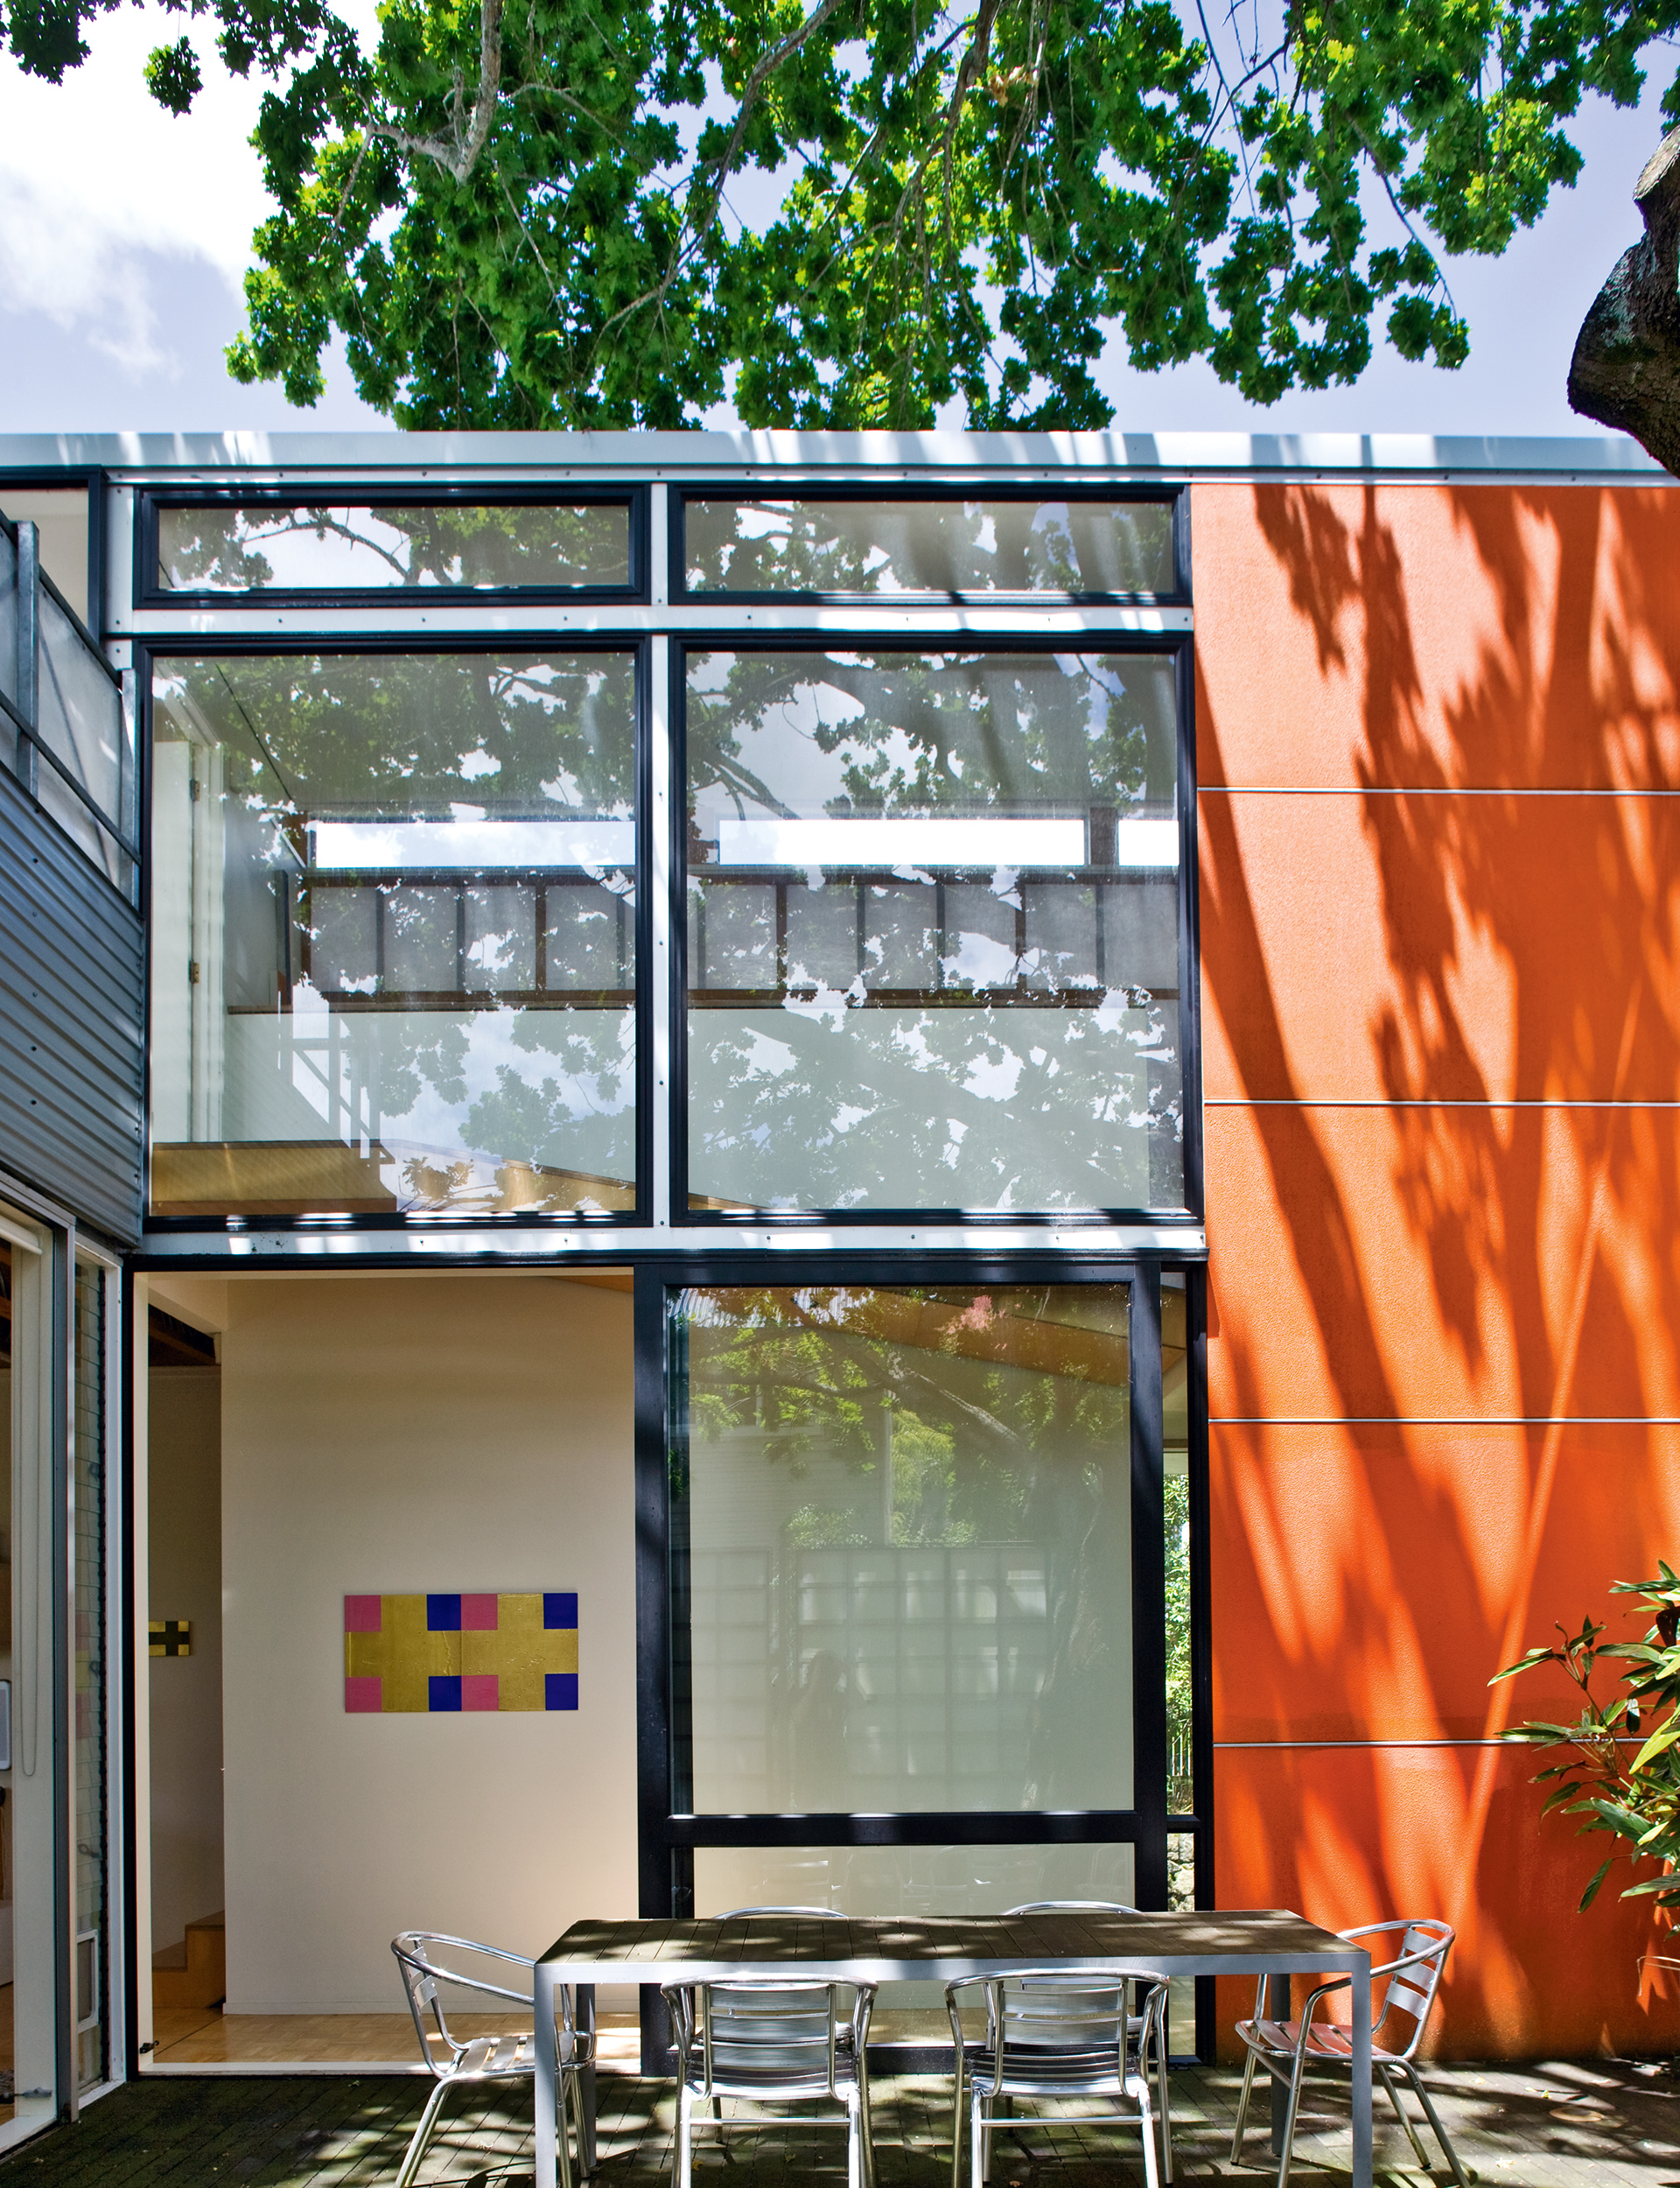 The outdoor dining area stands before the double-height entry foyer (with its timber ramp leading to the upper floor), and its striking metal framing and orange wall.